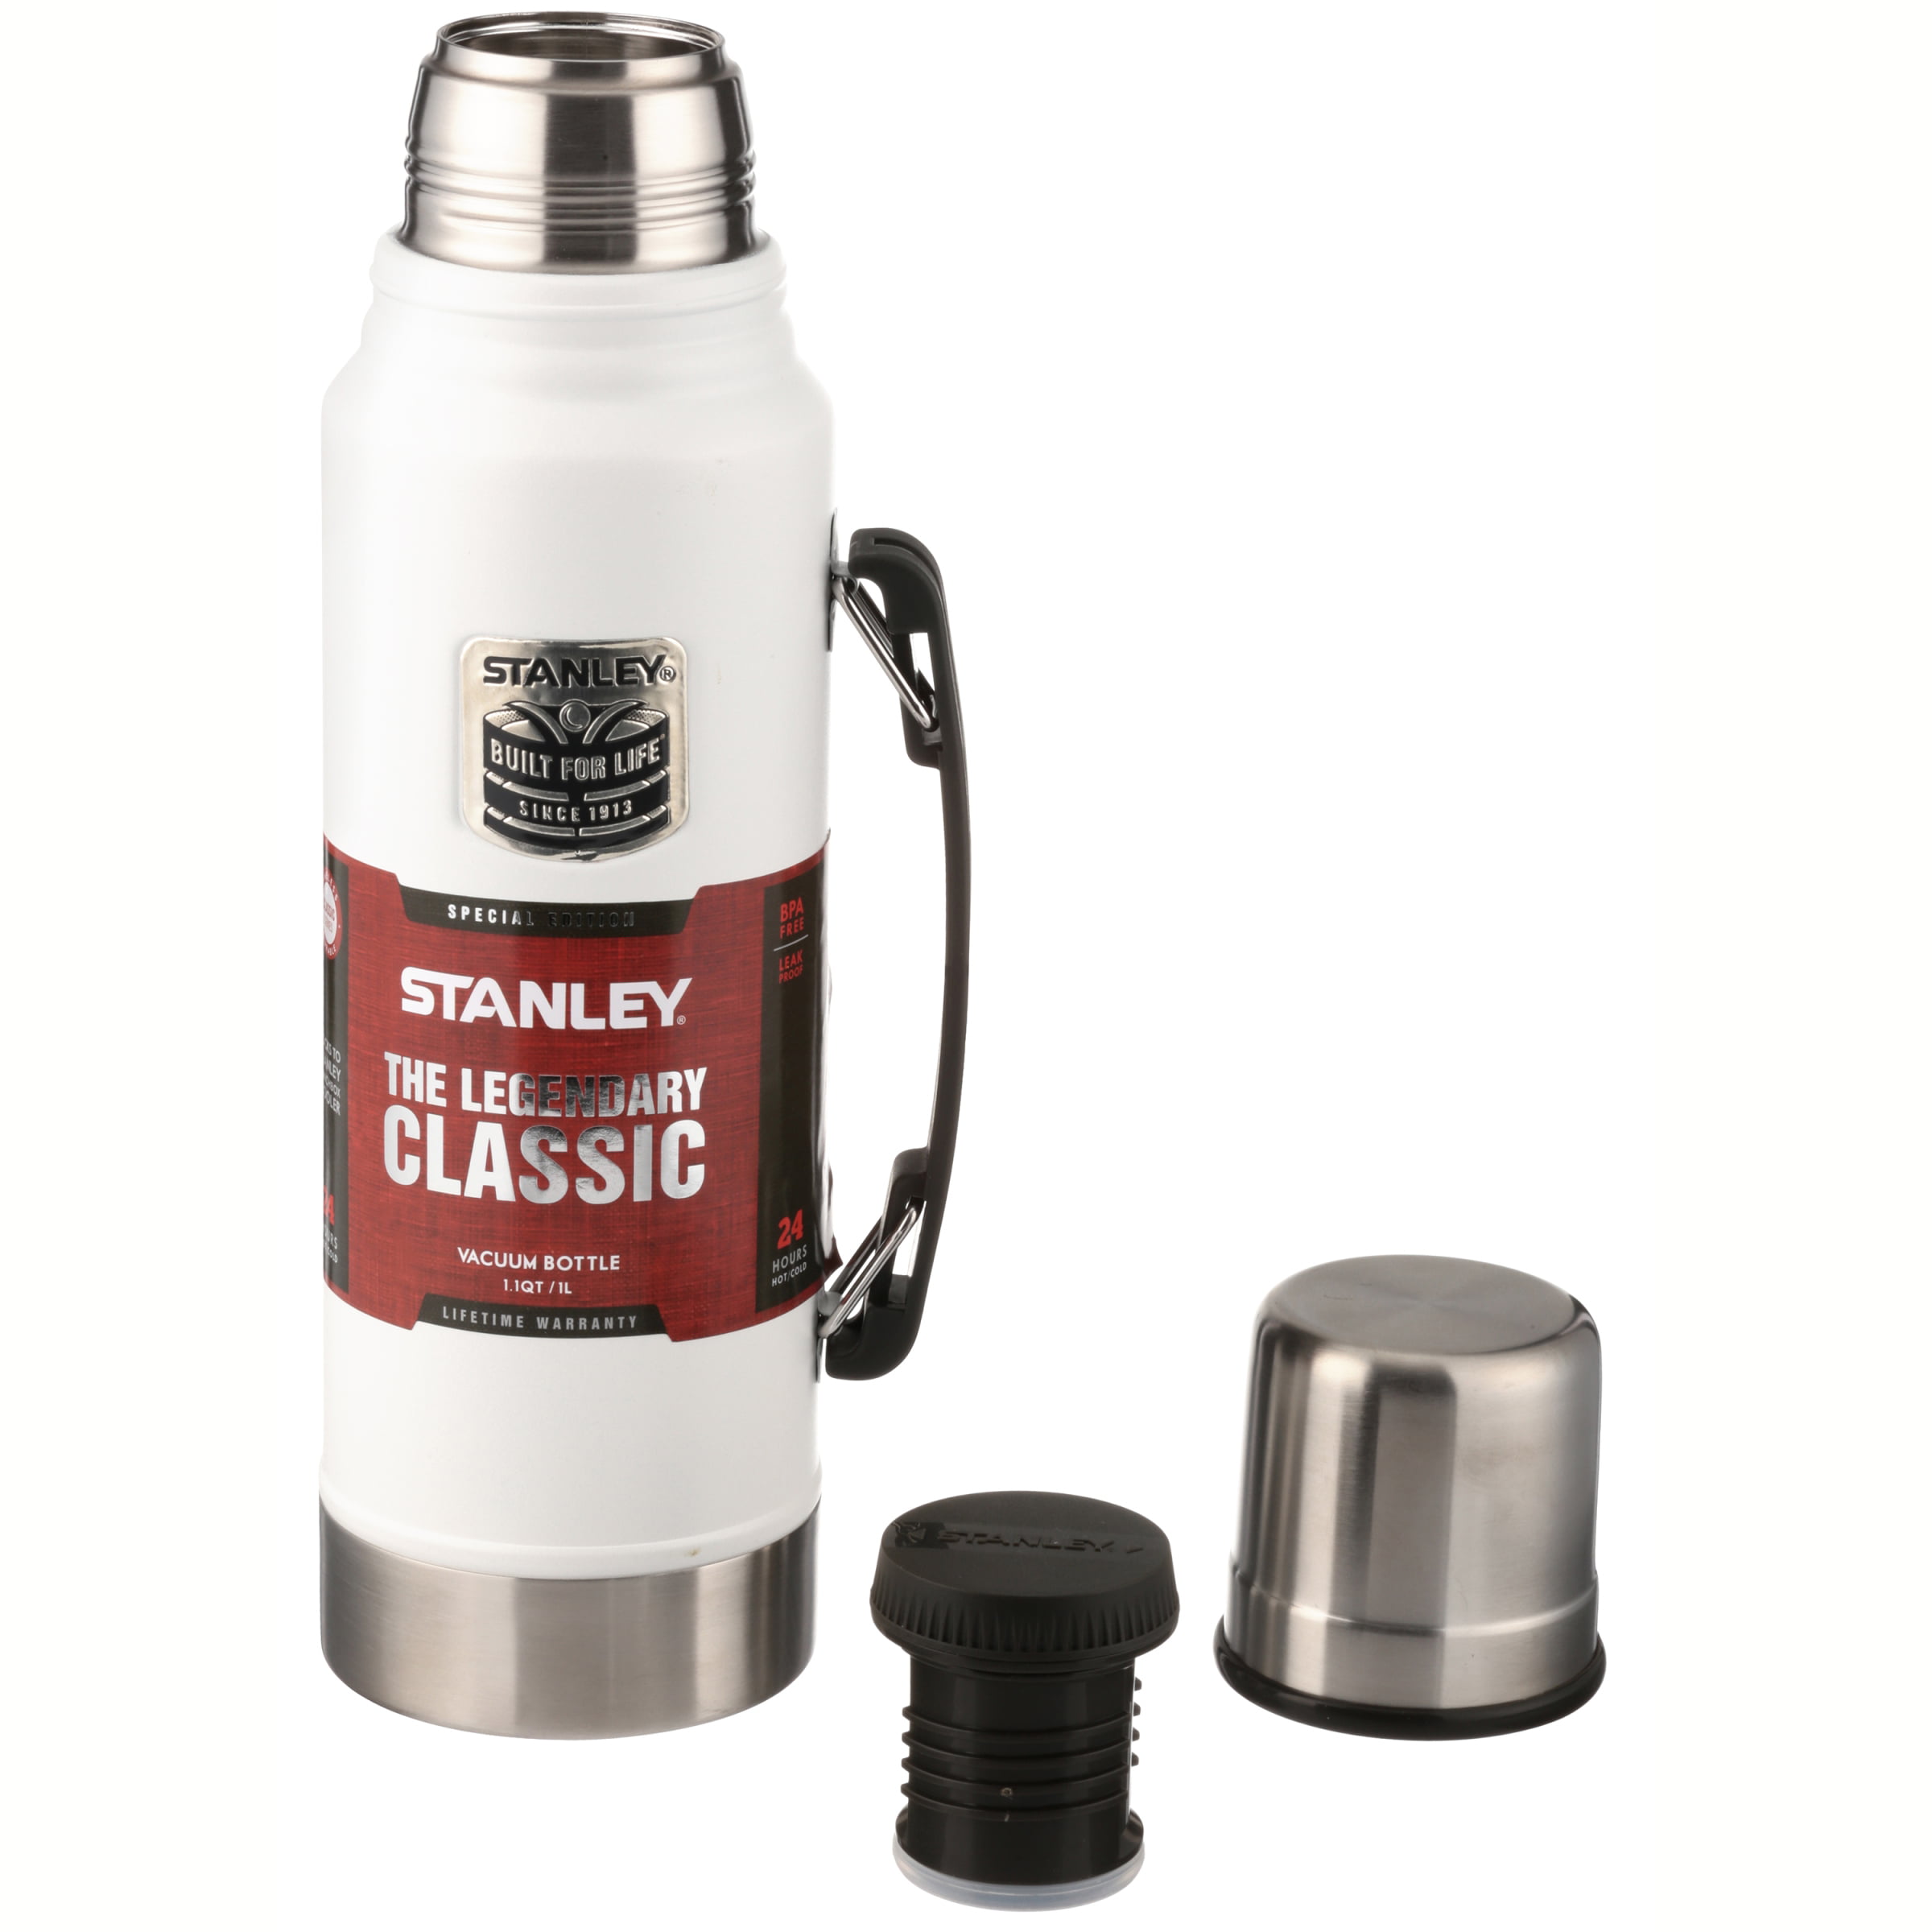 Stanley 500 ml Polar White Thermos - Built-In Pour Spout - Stainless Steel  - Boxed